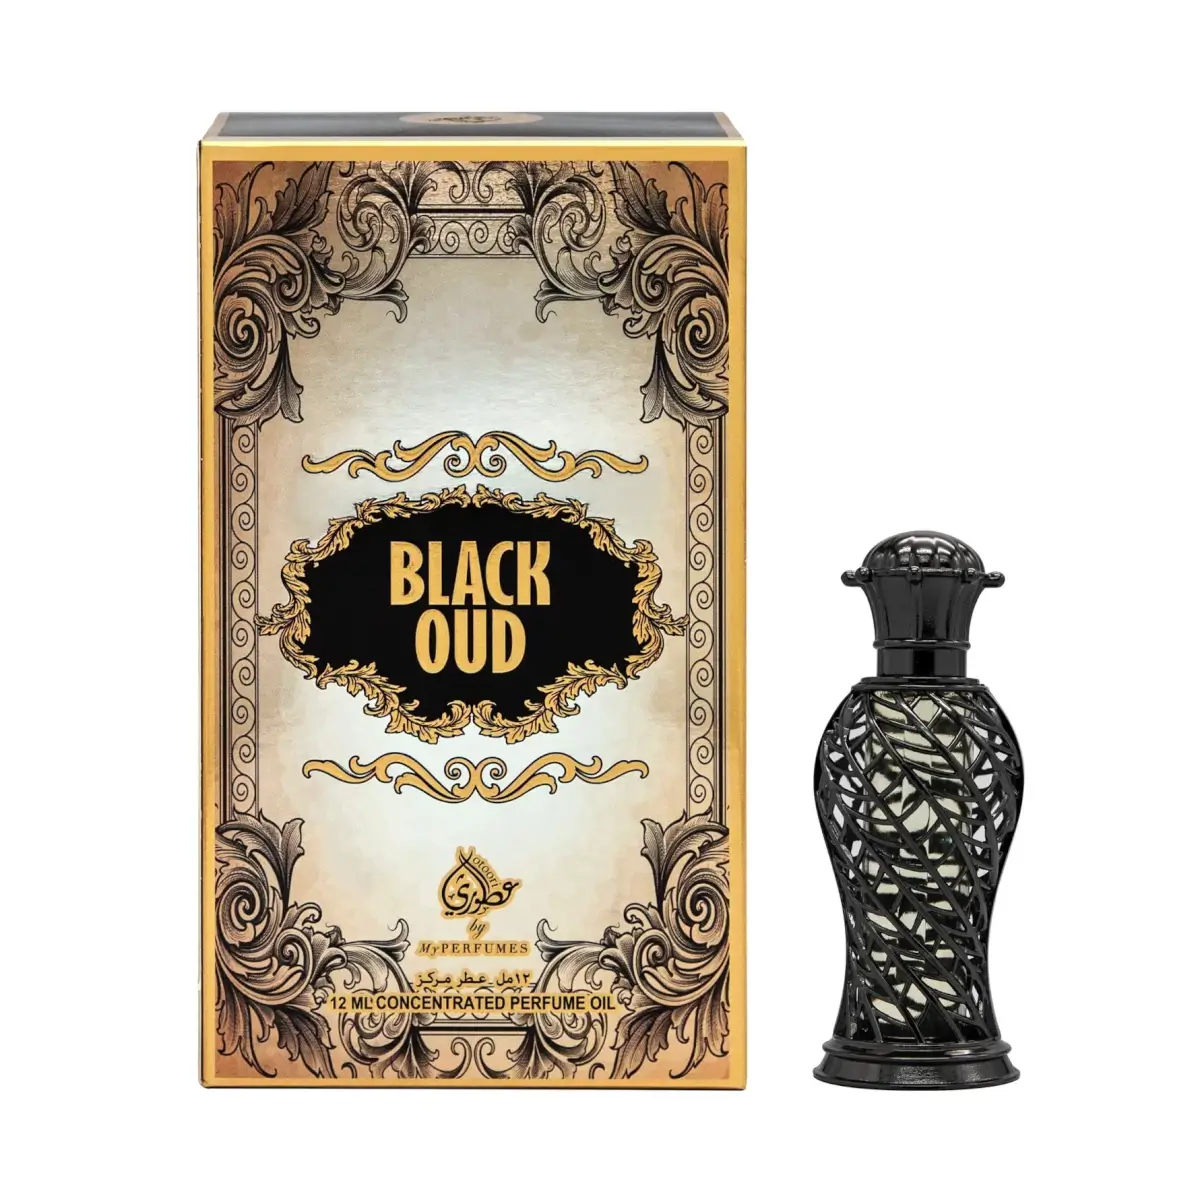 Black Oud / Oud Aswad Concentrated Perfume Oil / Attar 12Ml By Otoori (My Perfumes)